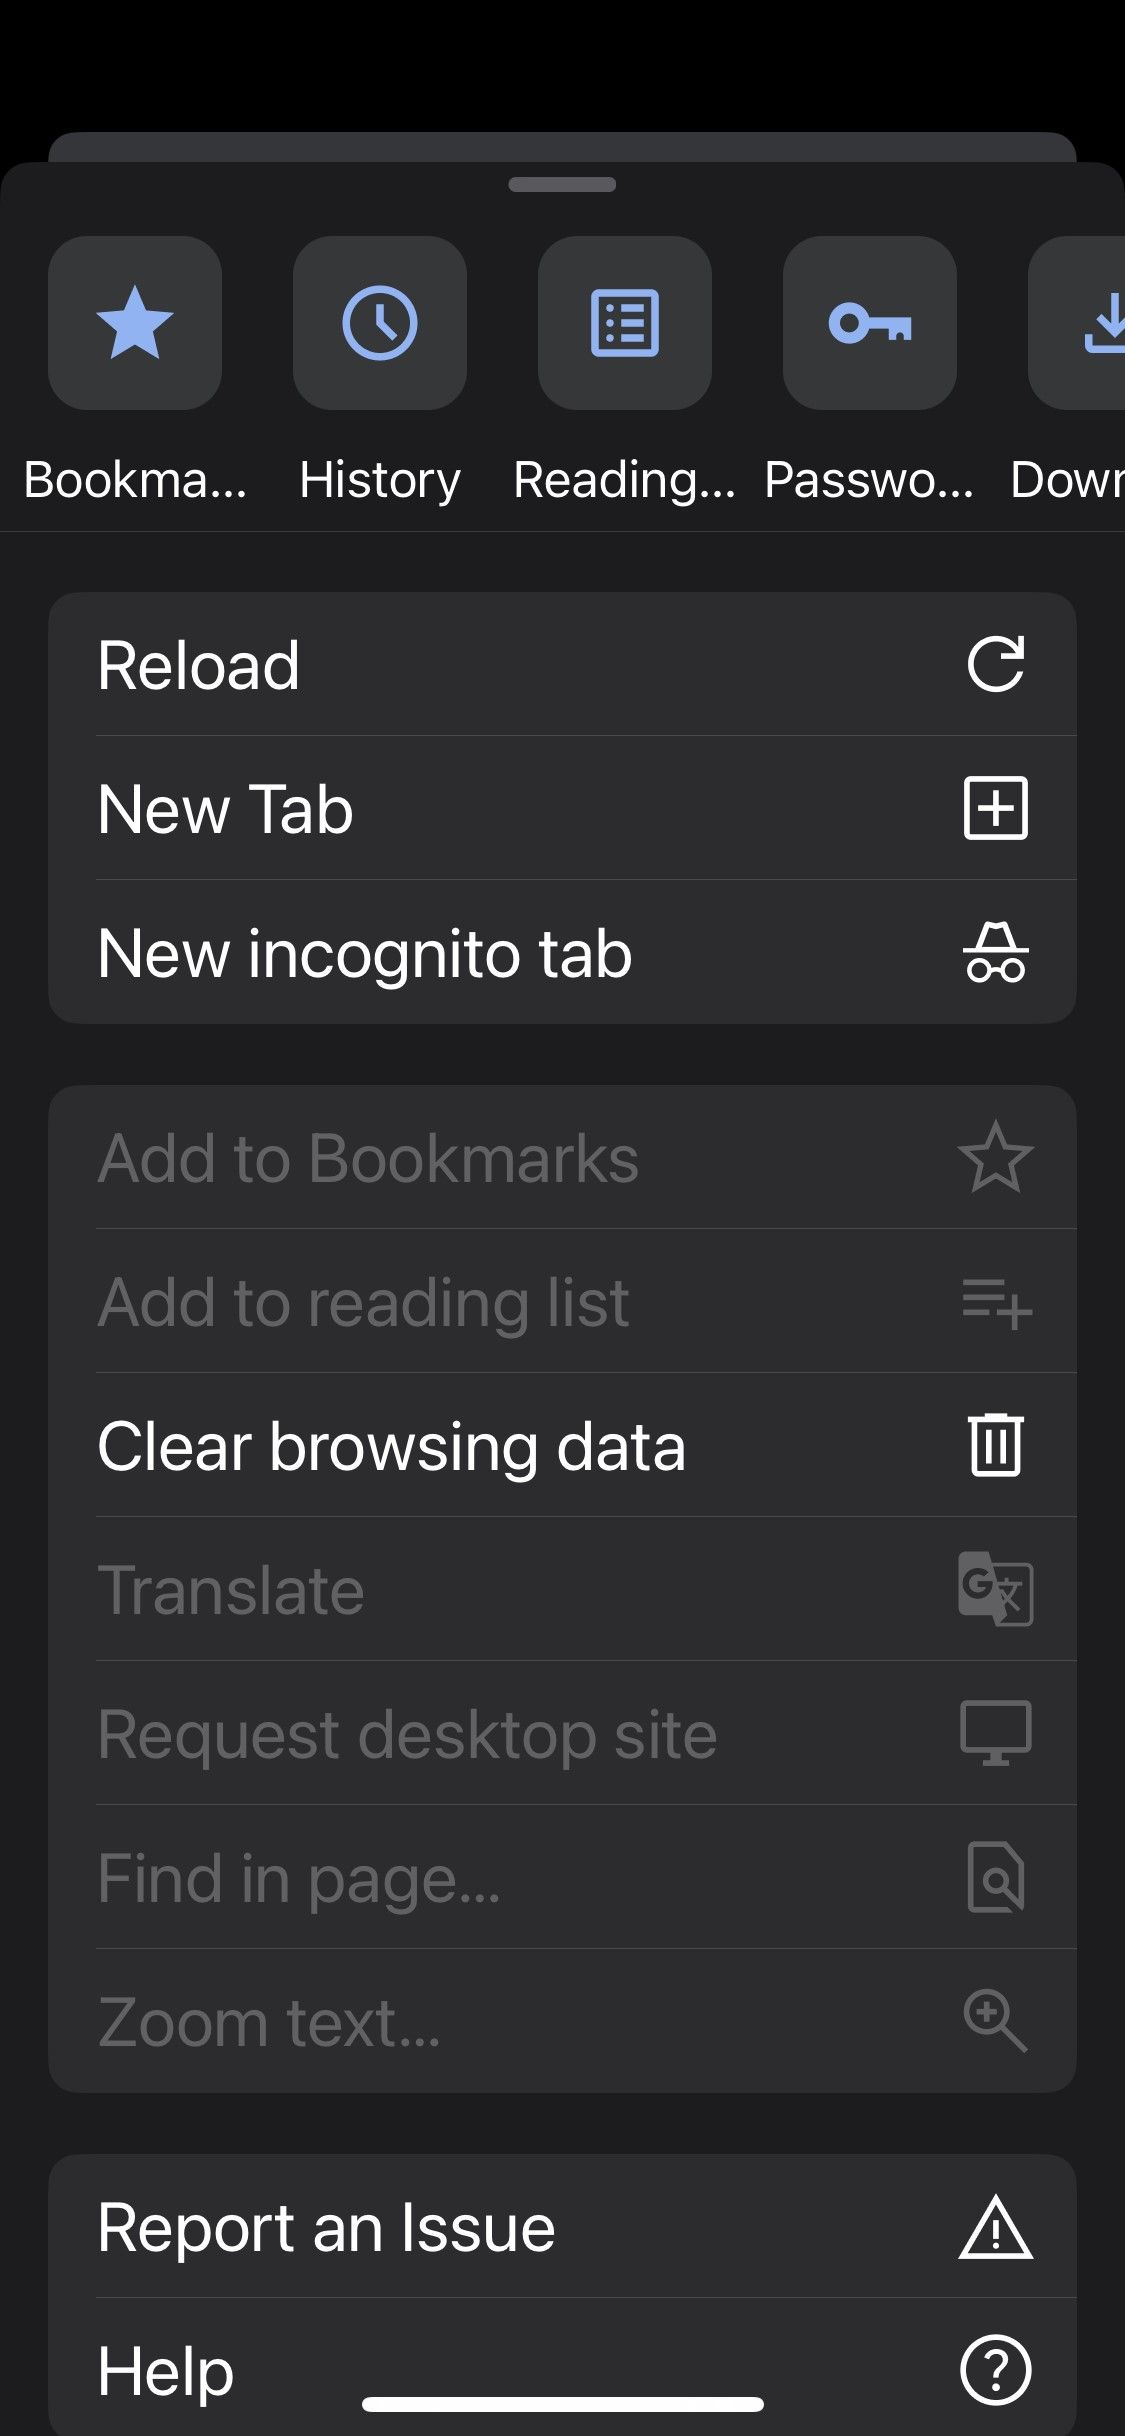 Go to the Password Manager Option in the Chrome App on iOS